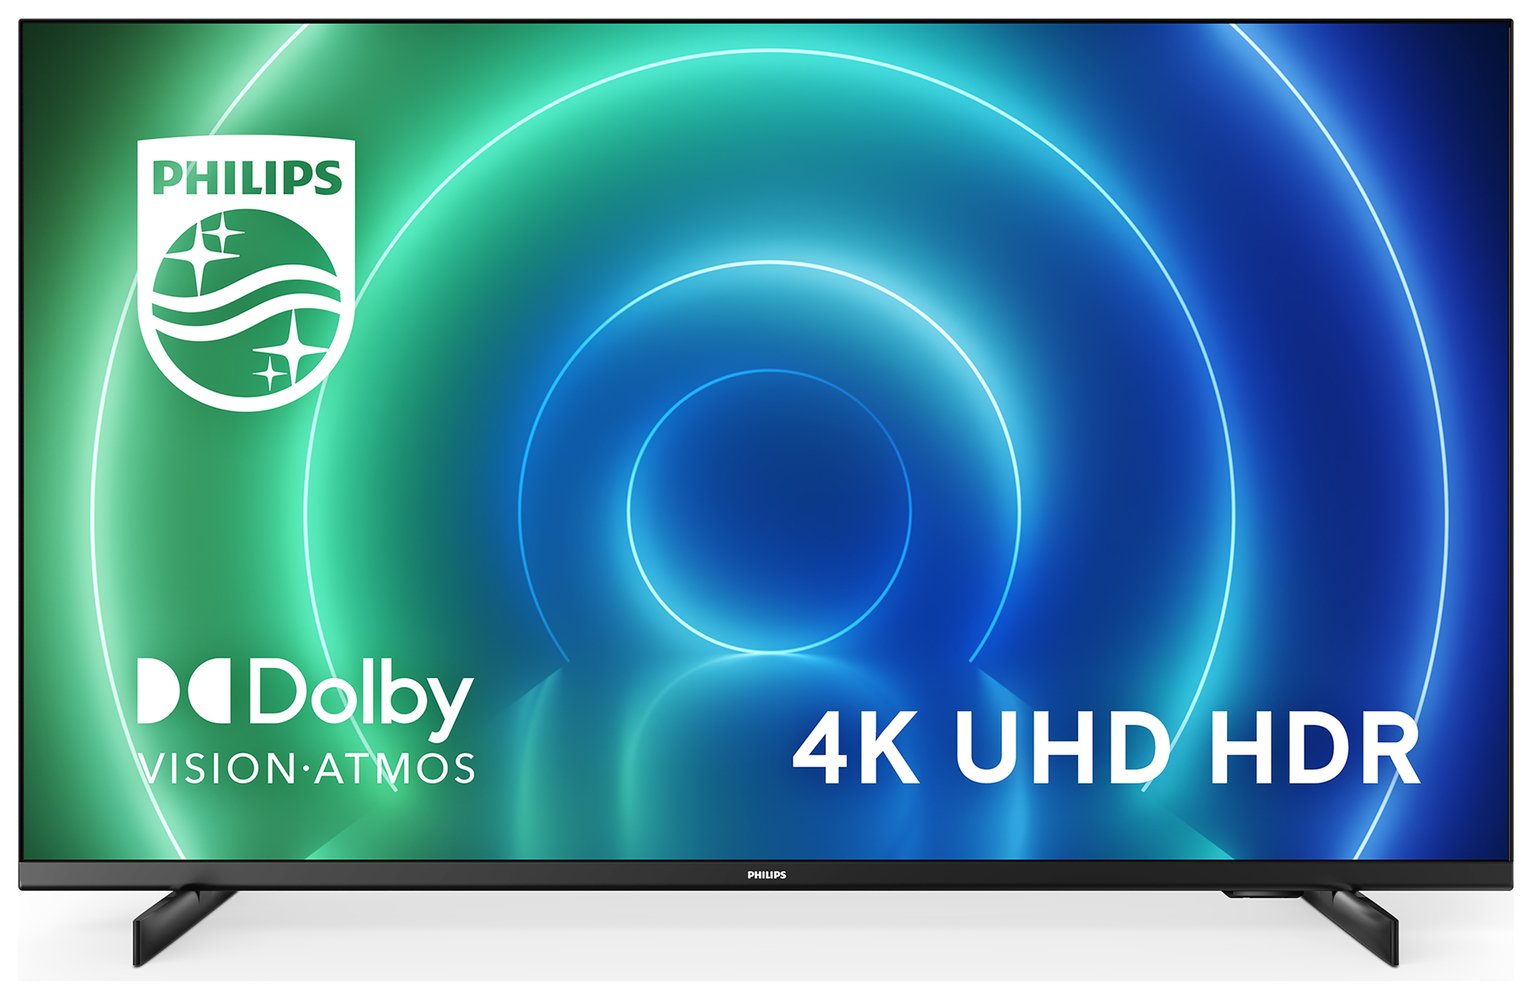 Philips 65 Inch 65PUS7506 Smart 4K UHD HDR LED Freeview TV